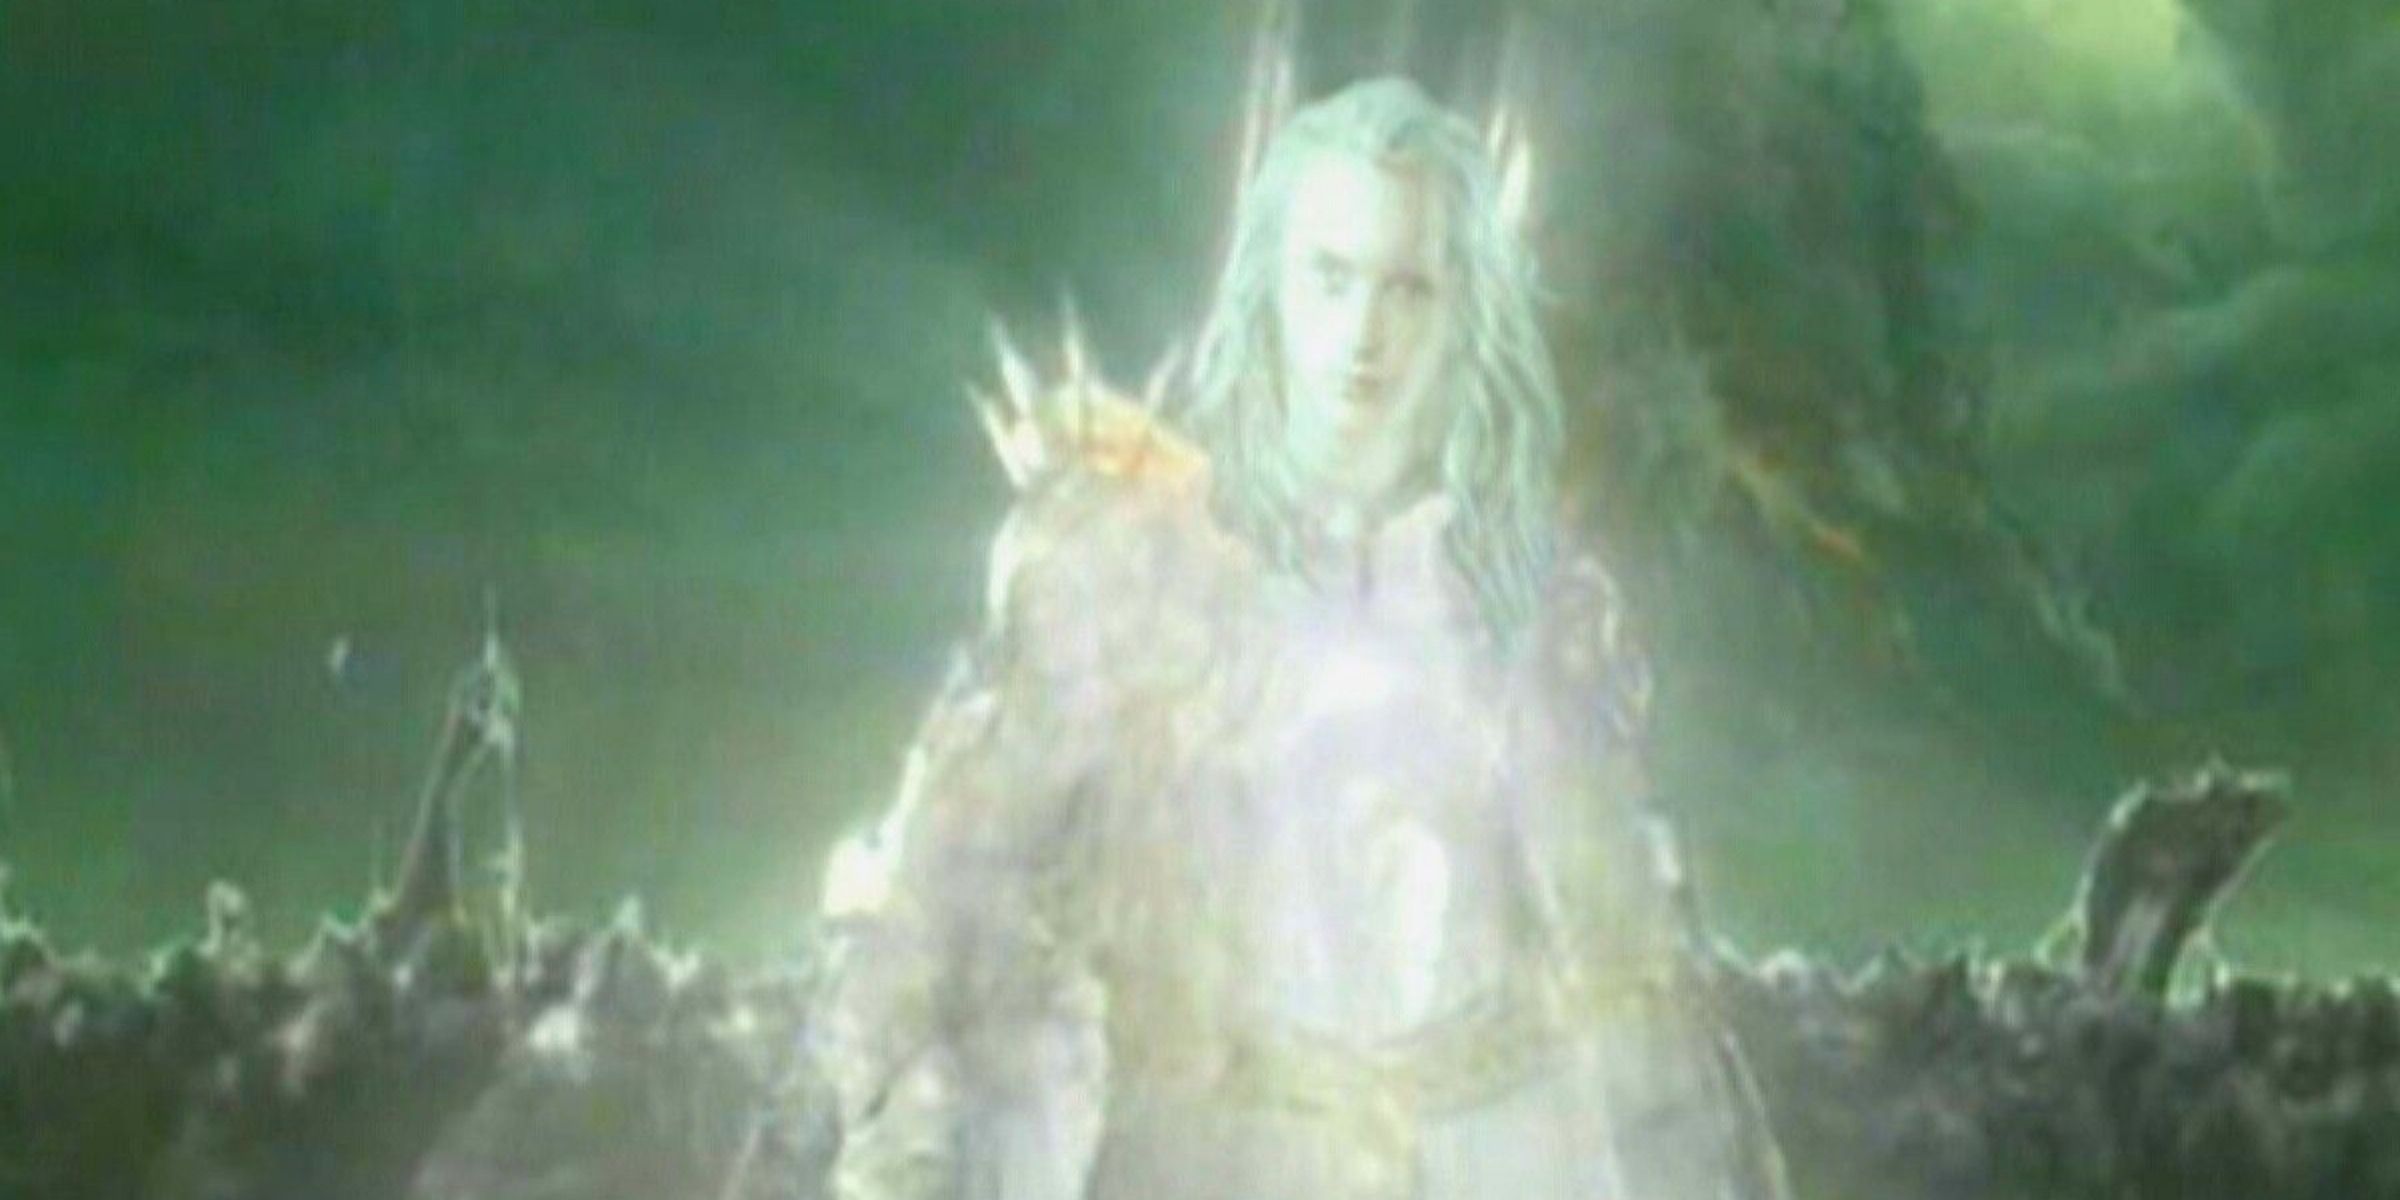 Sauron as Annatar in The Lord of the Rings